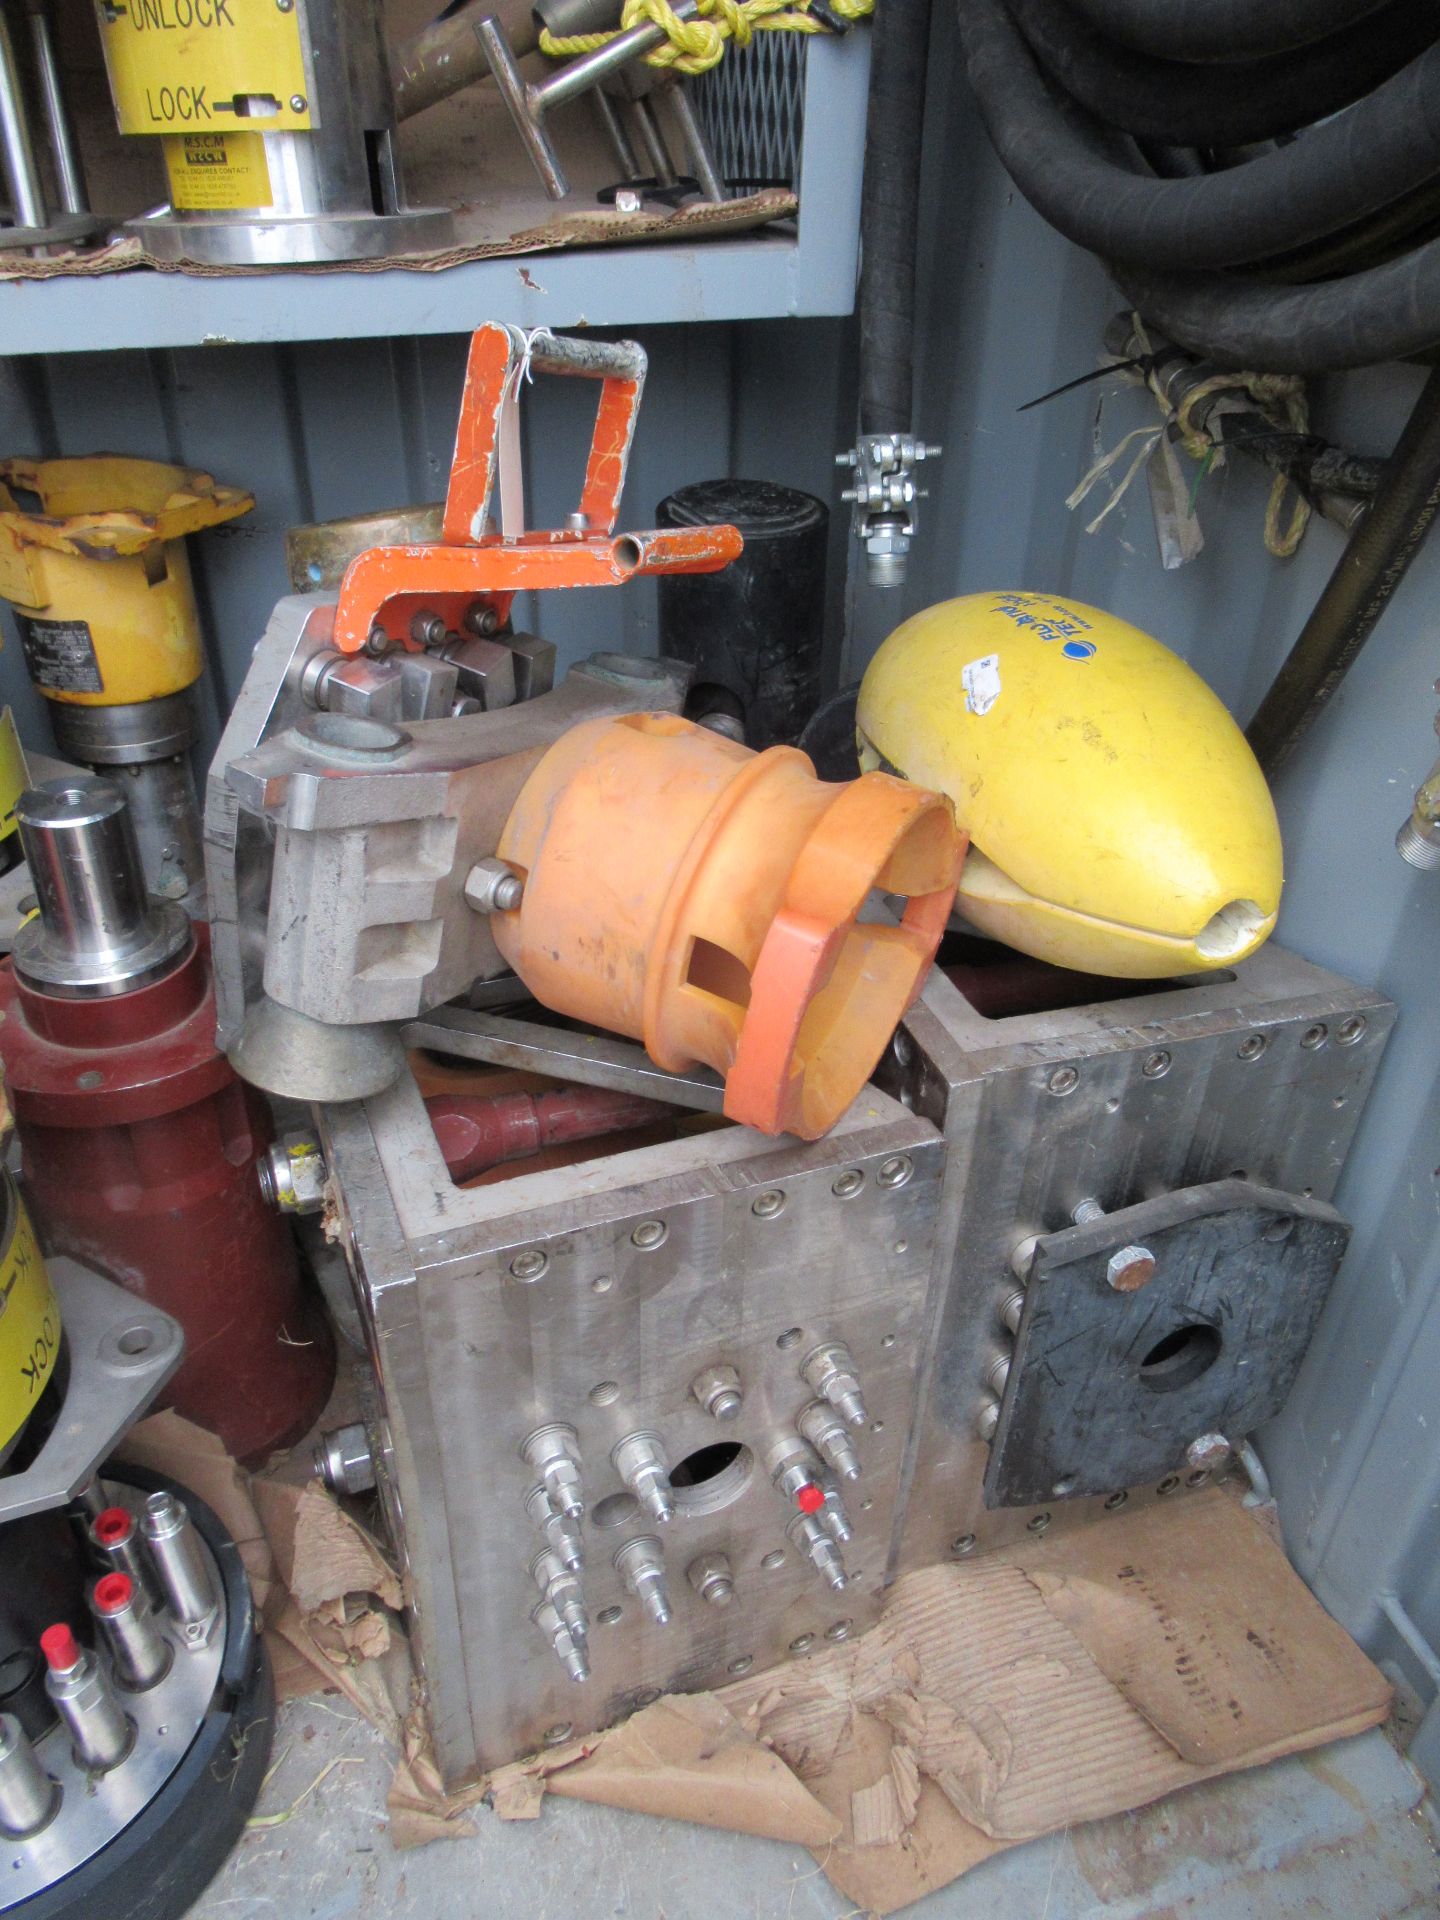 LOT CONSISTING OF 8’ X 4’ SEA CONTAINER AND CONTENTS, including subsea connectors and umbilical - Image 7 of 14